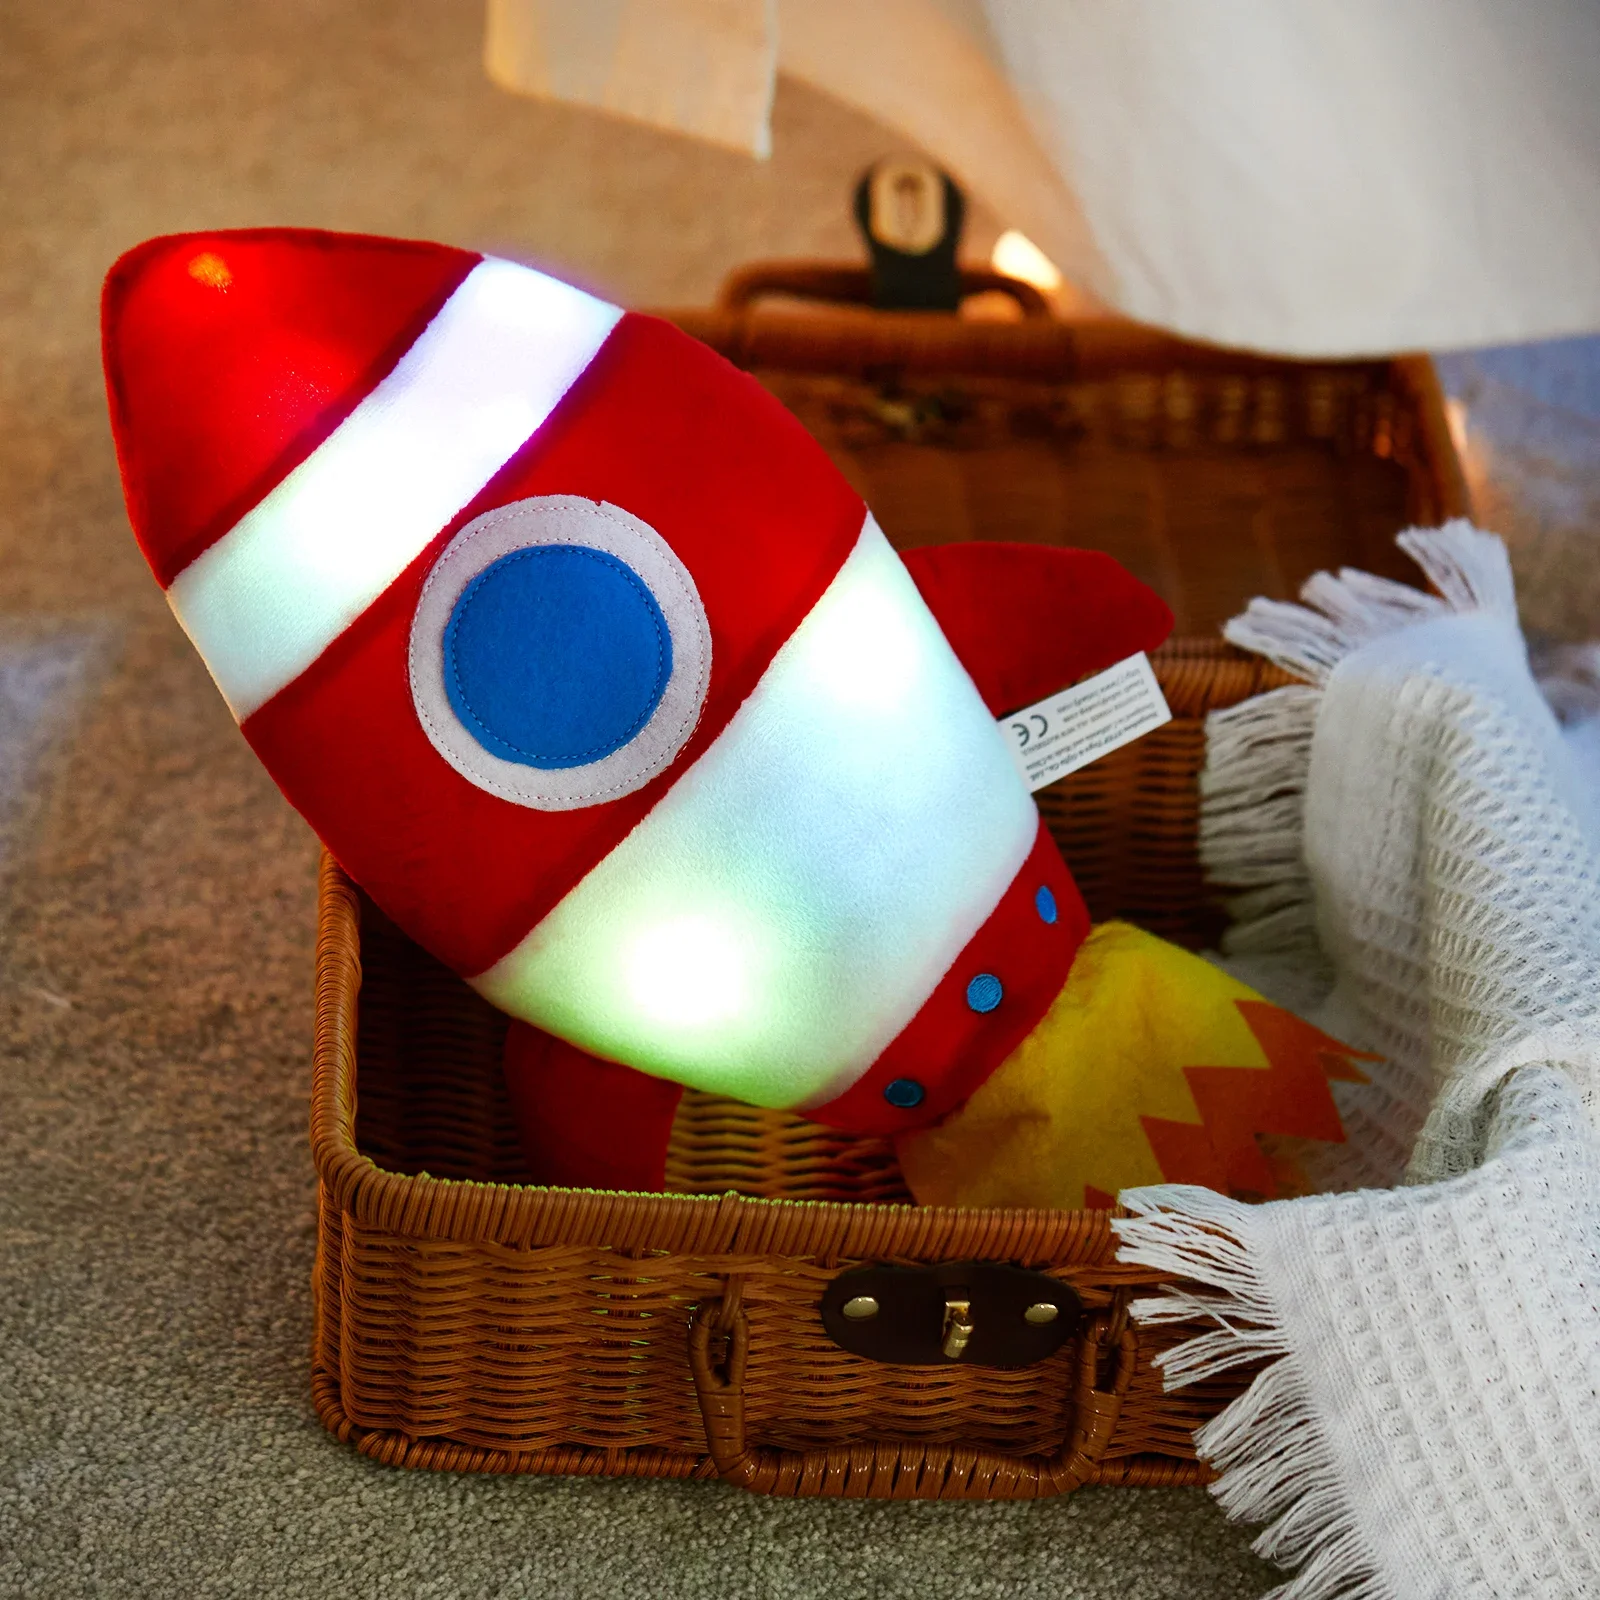 

40cm Light-up Rocket Doll Plush Toys Sleeping Pillows Cute Soft PP Cotton Birthday Gift Stuffed Animals for Girls Glowing Toy